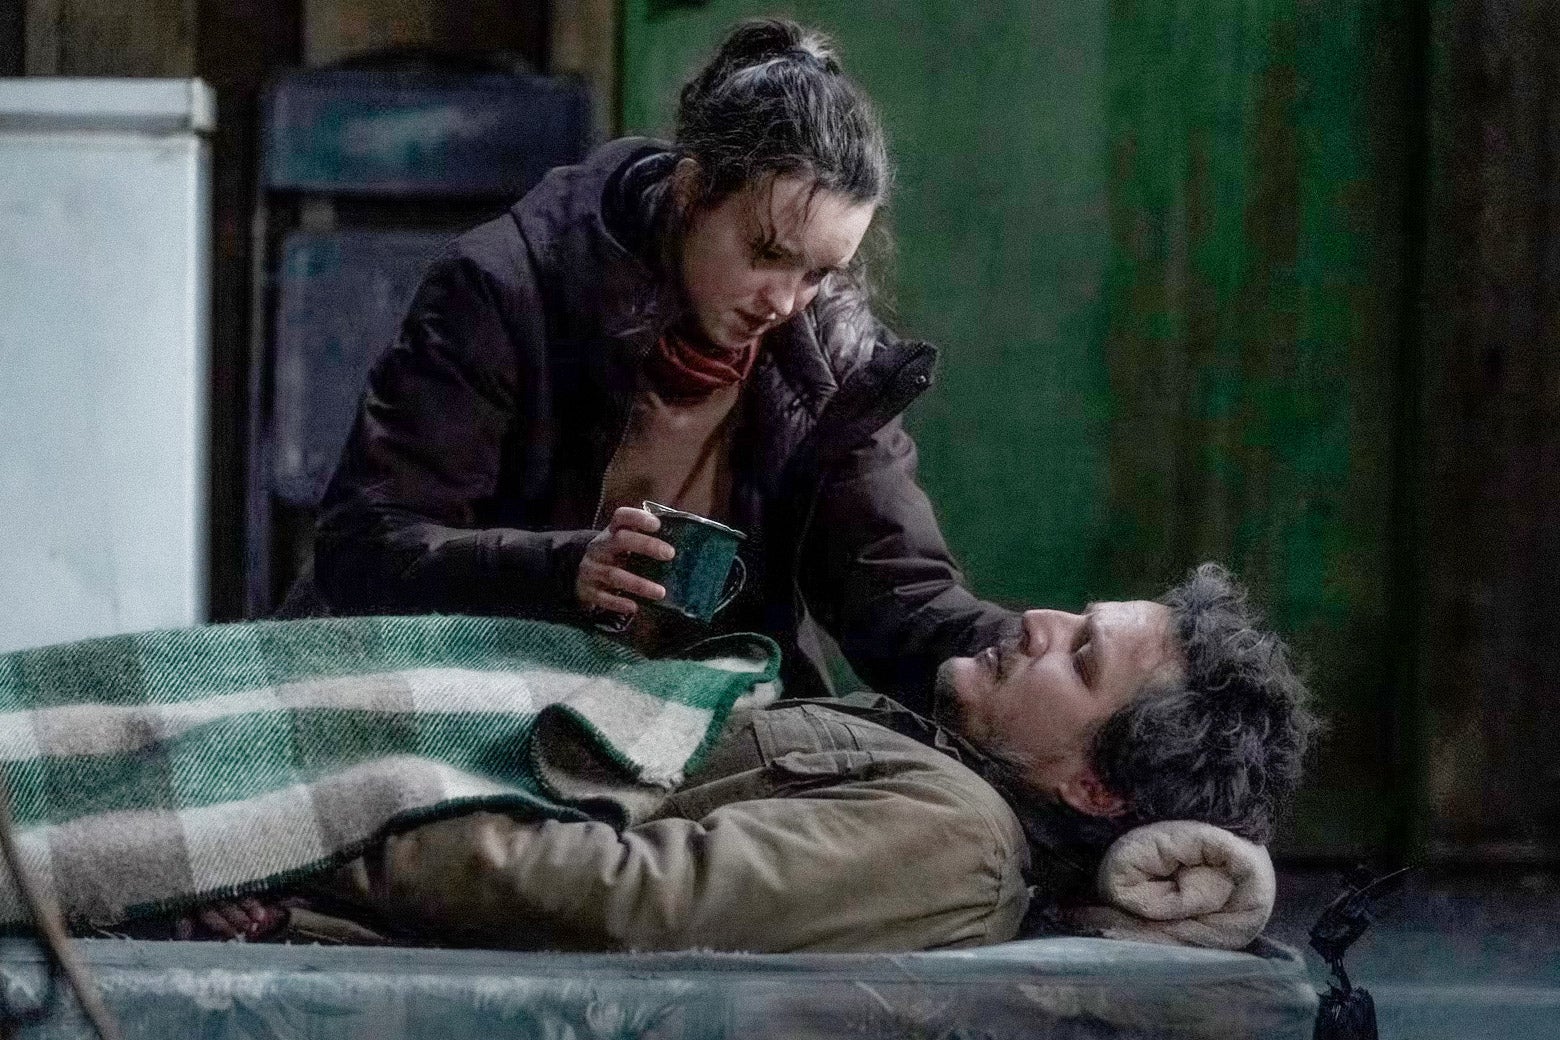 A young woman tends to a man on his sick bed.